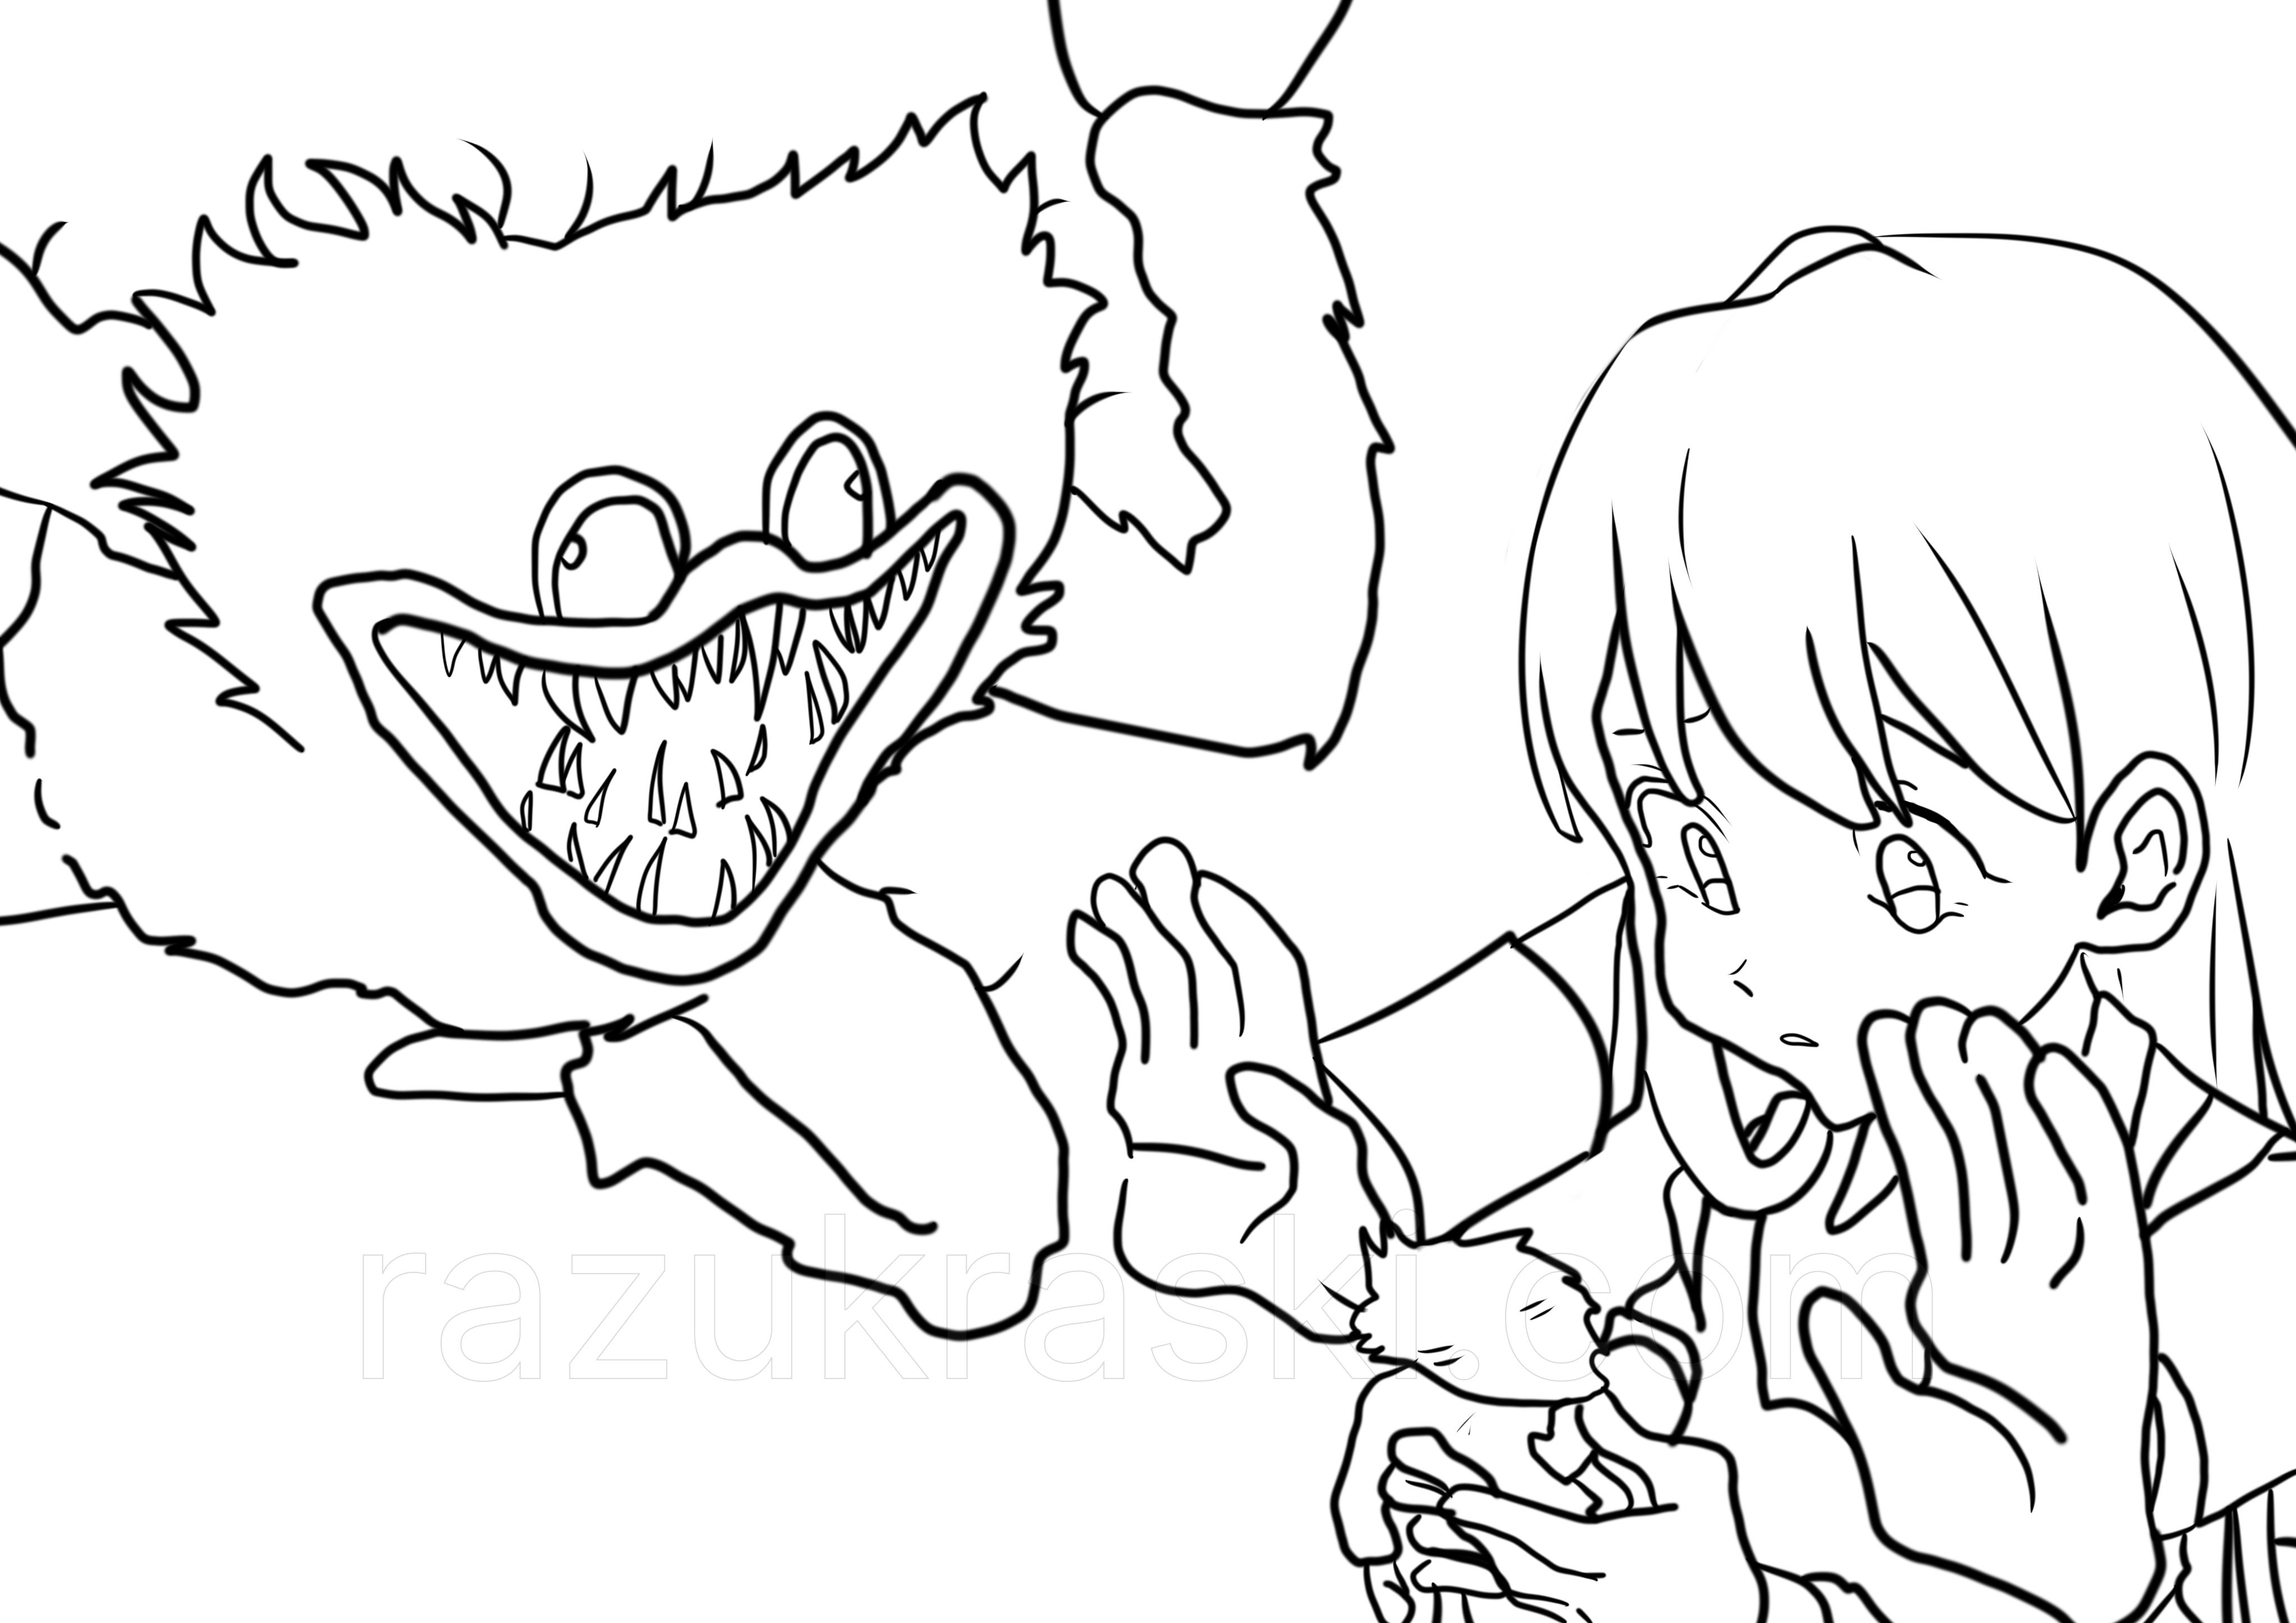 Coloring page Huggy Wuggy blue monster and girl